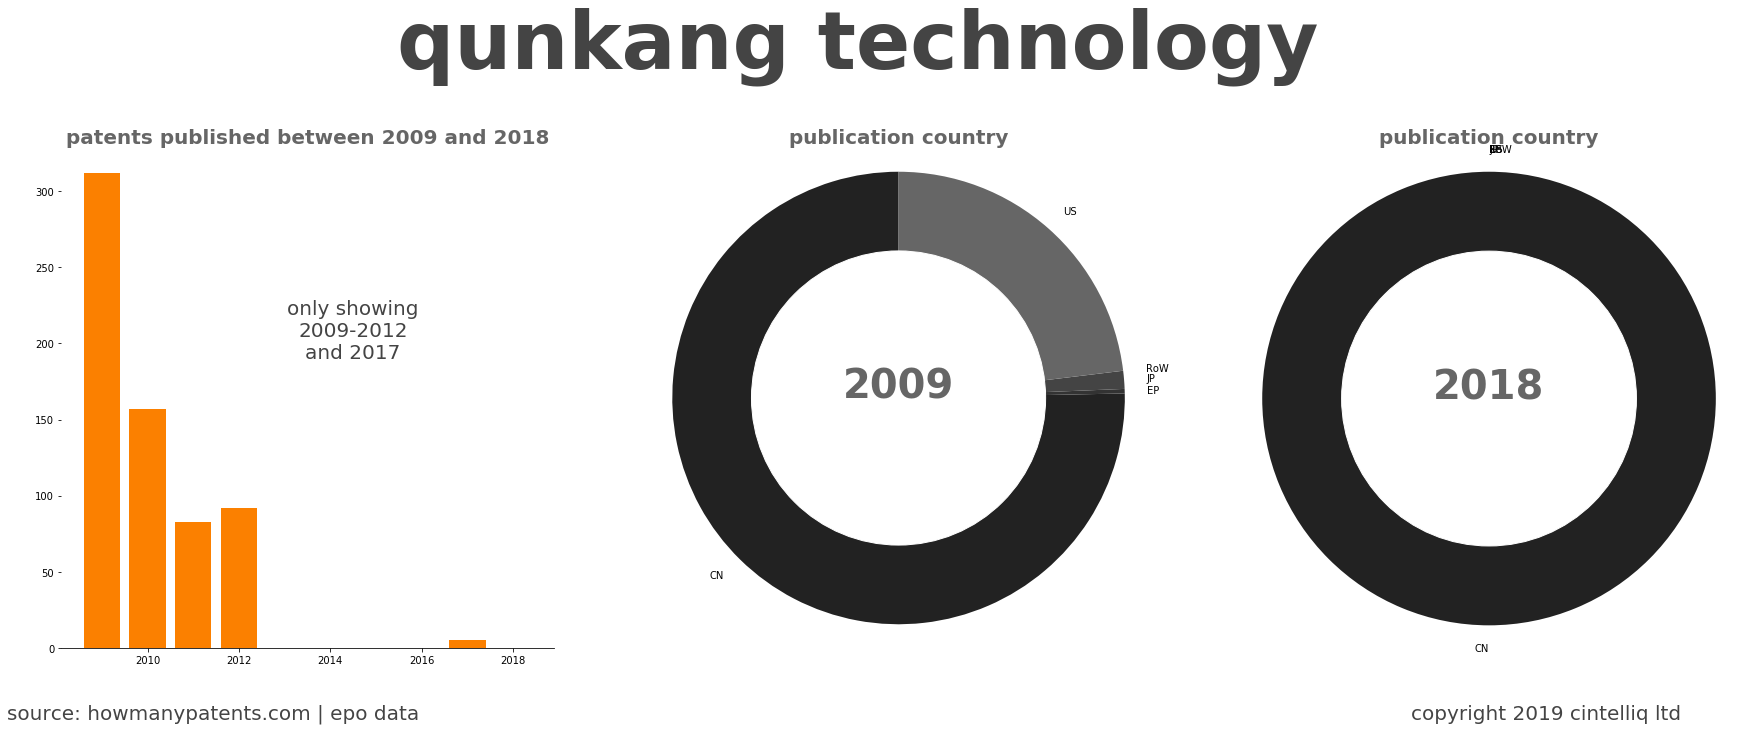 summary of patents for Qunkang Technology 